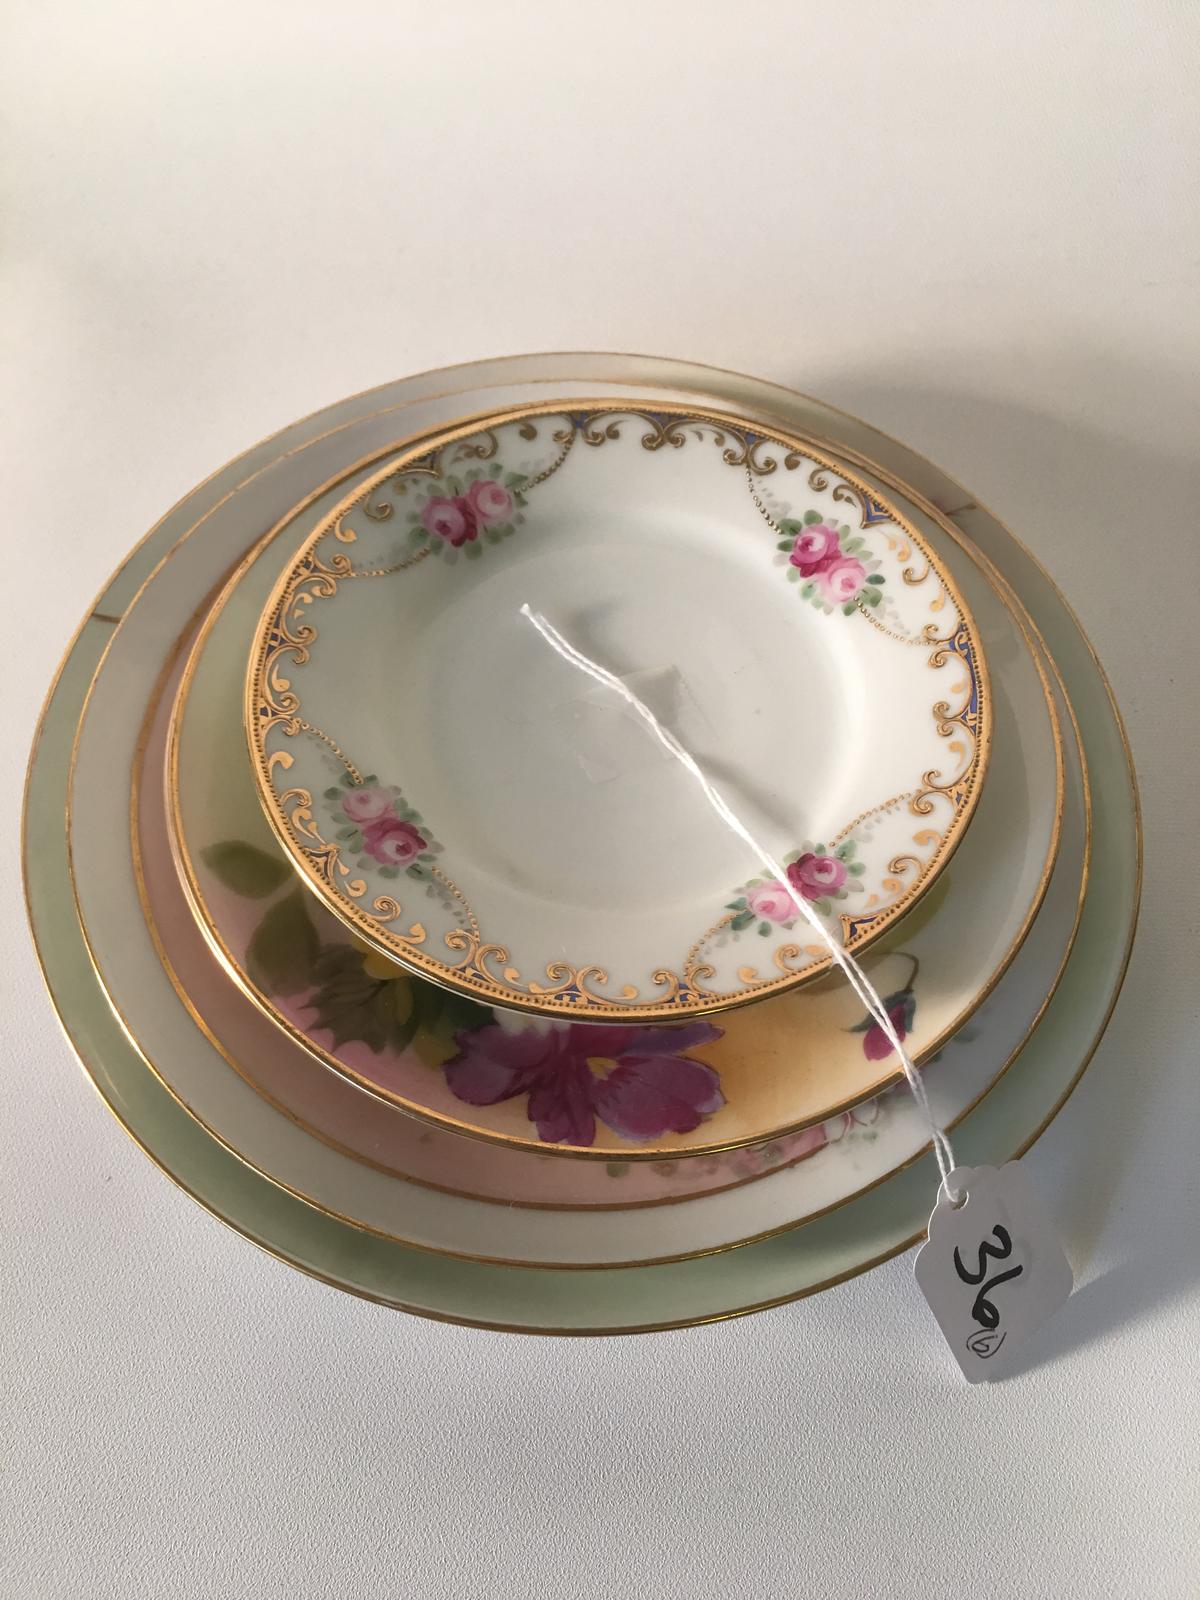 Vintage Hand Painted Plates From 5"-8.5" Diameter